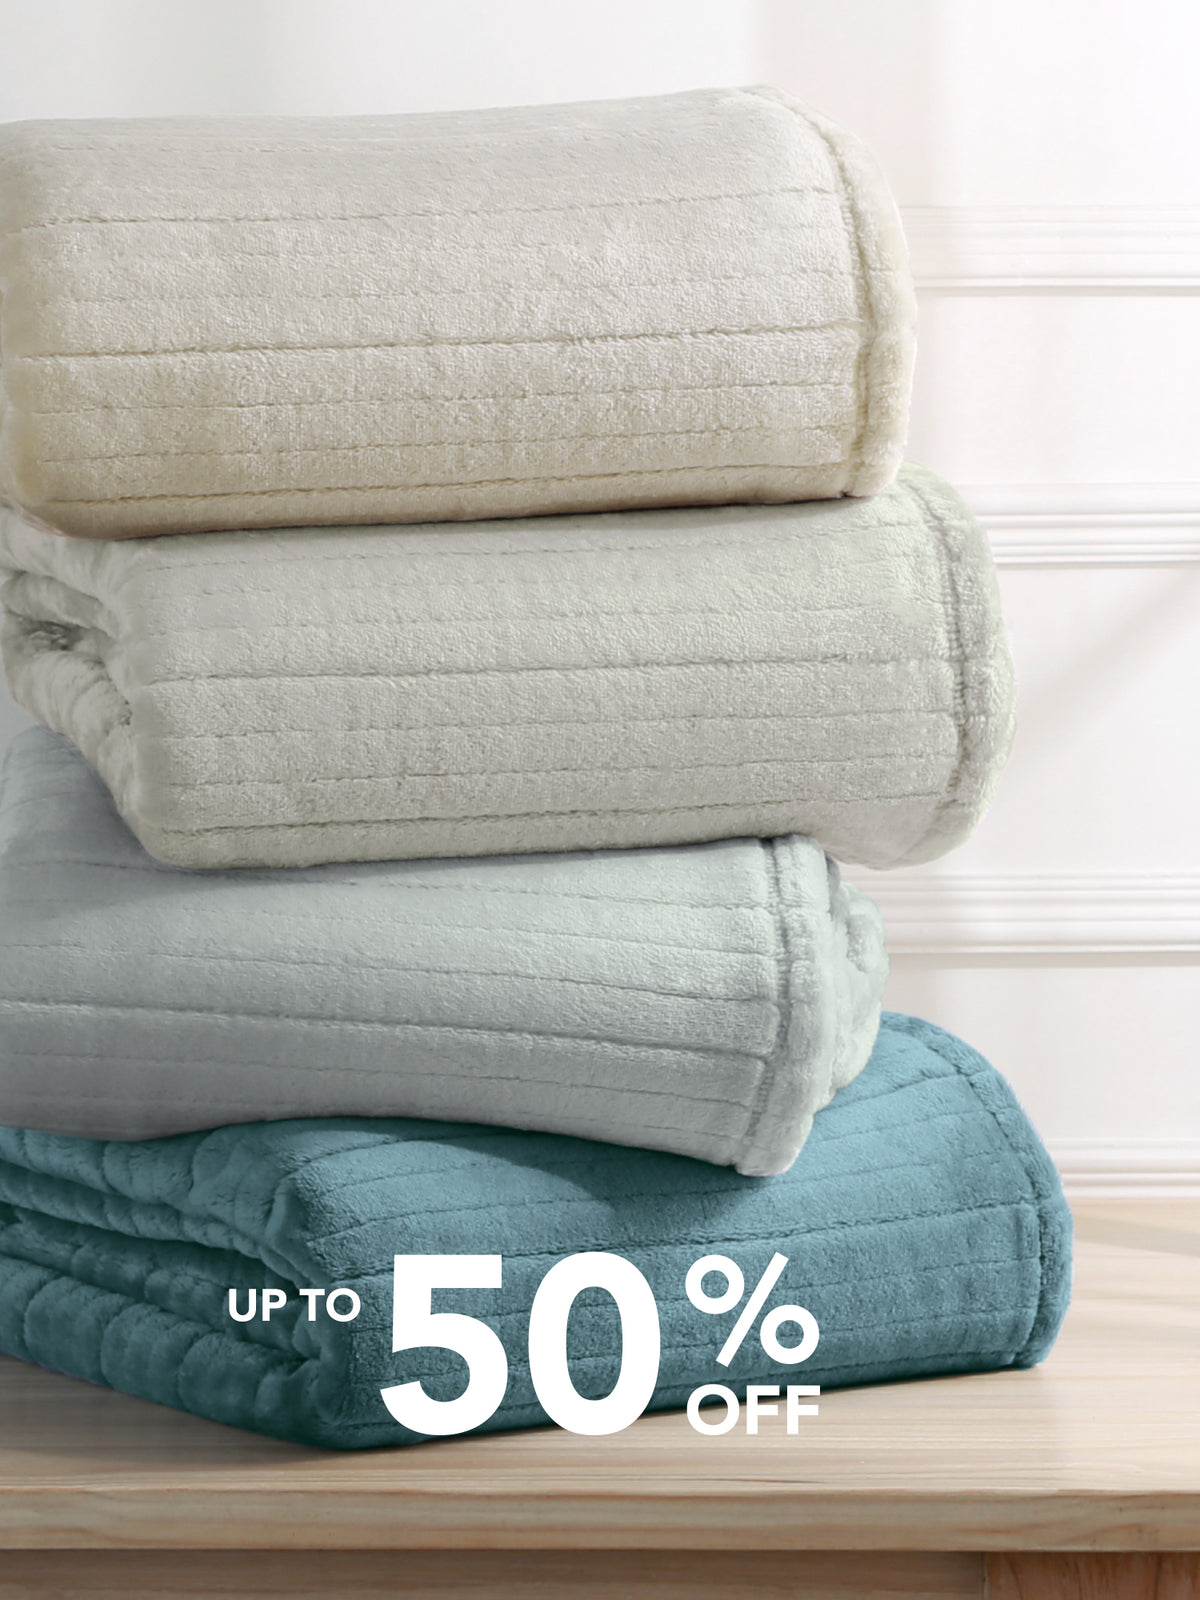 Enjoy up to 50% off our clearance collection featuring our Ribbed VelvetLoft Blanket in a variety of colors.